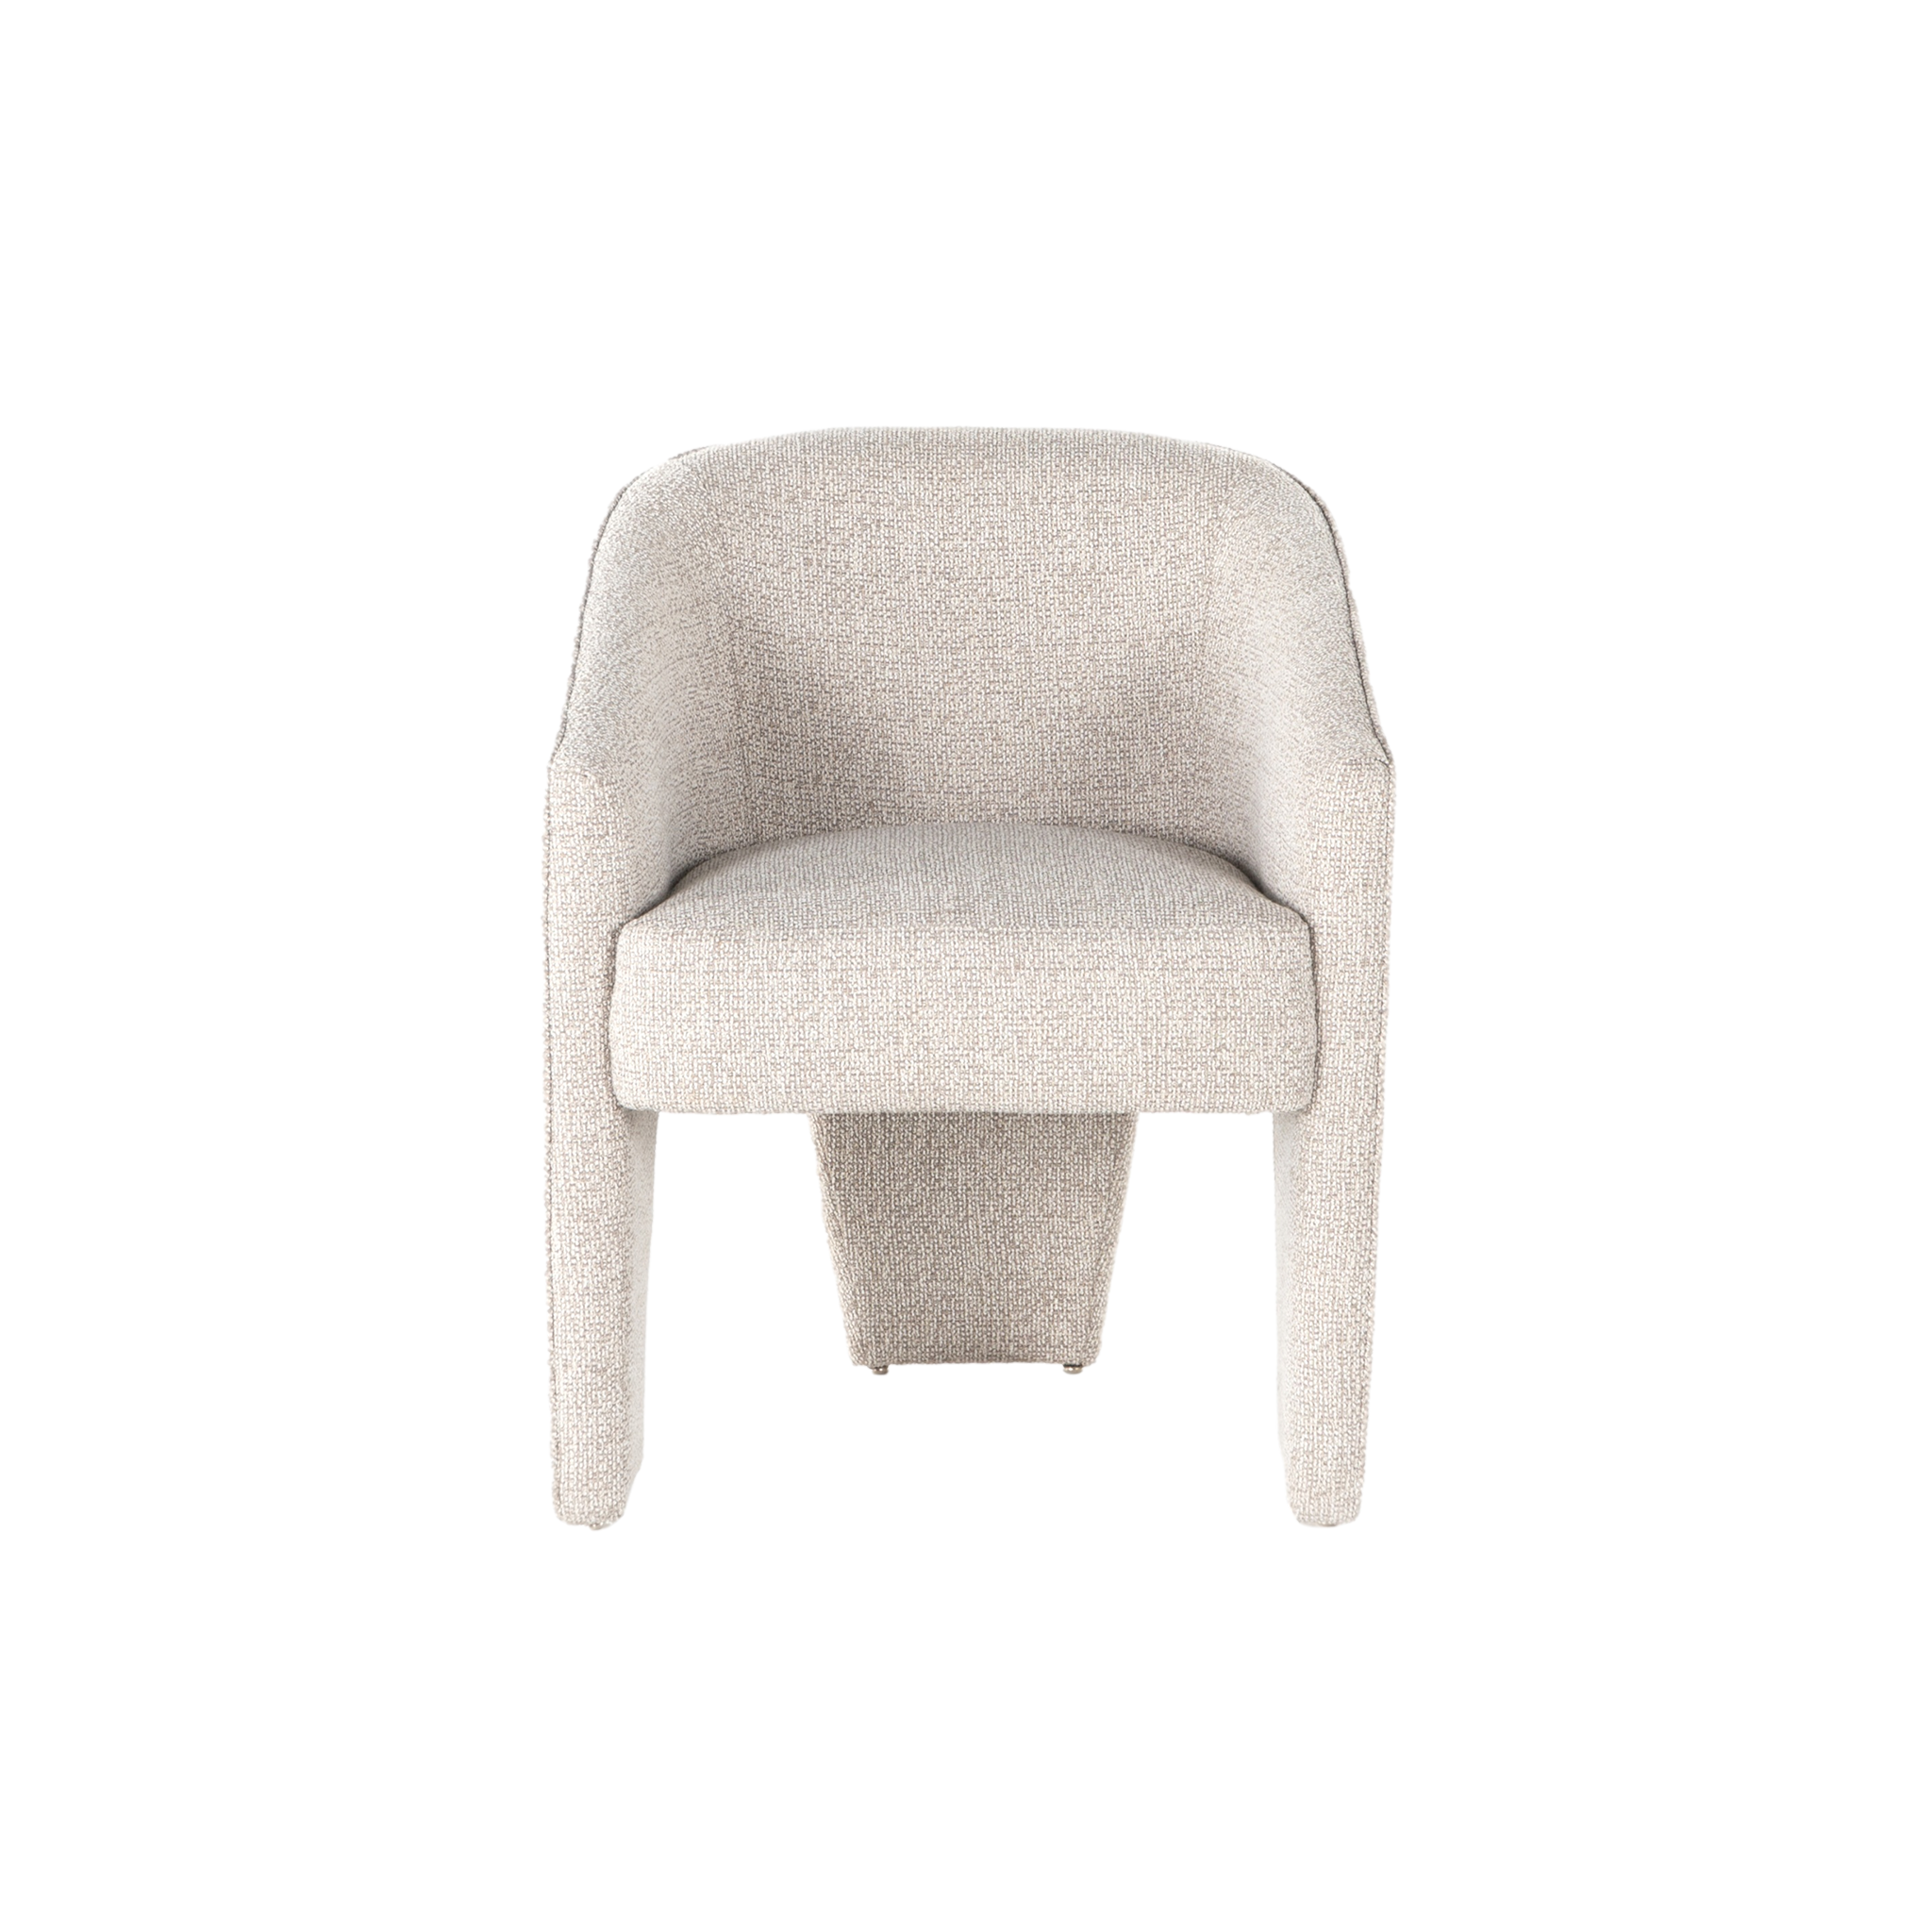 Fae Dining Chair in Bellamy Storm